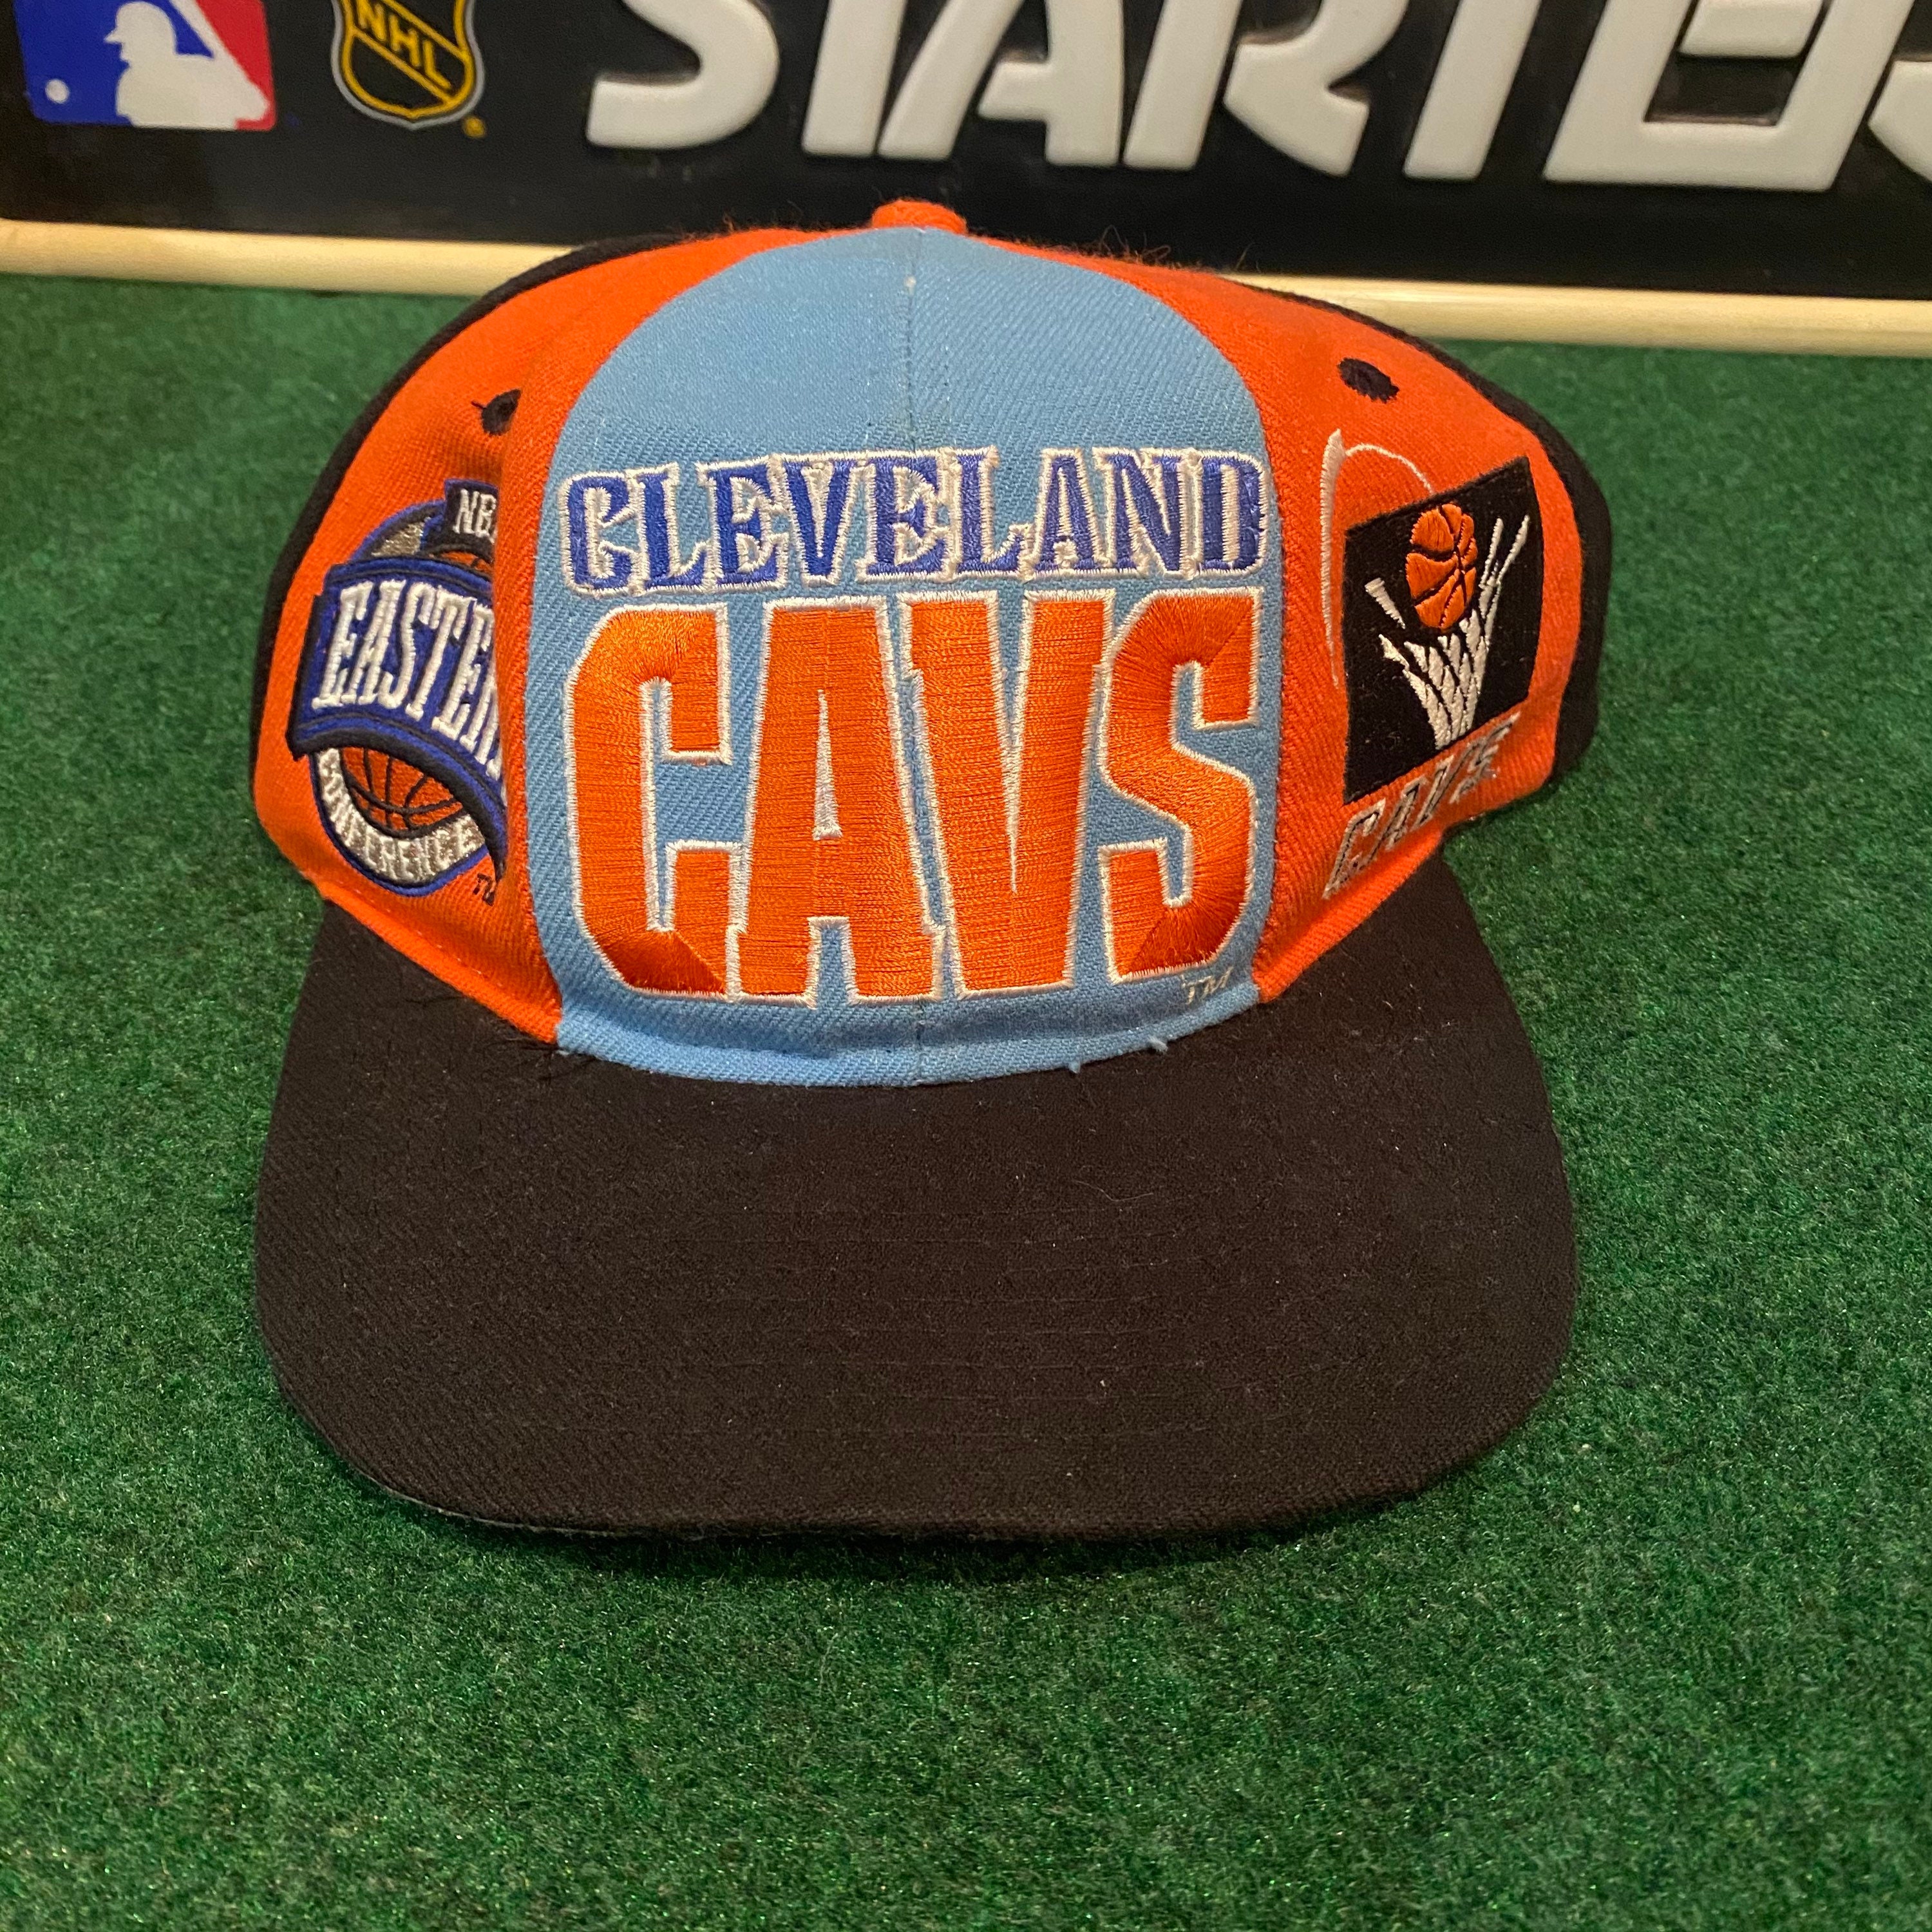 Vintage Cleveland Cavaliers Competitor Snapback Hat NBA